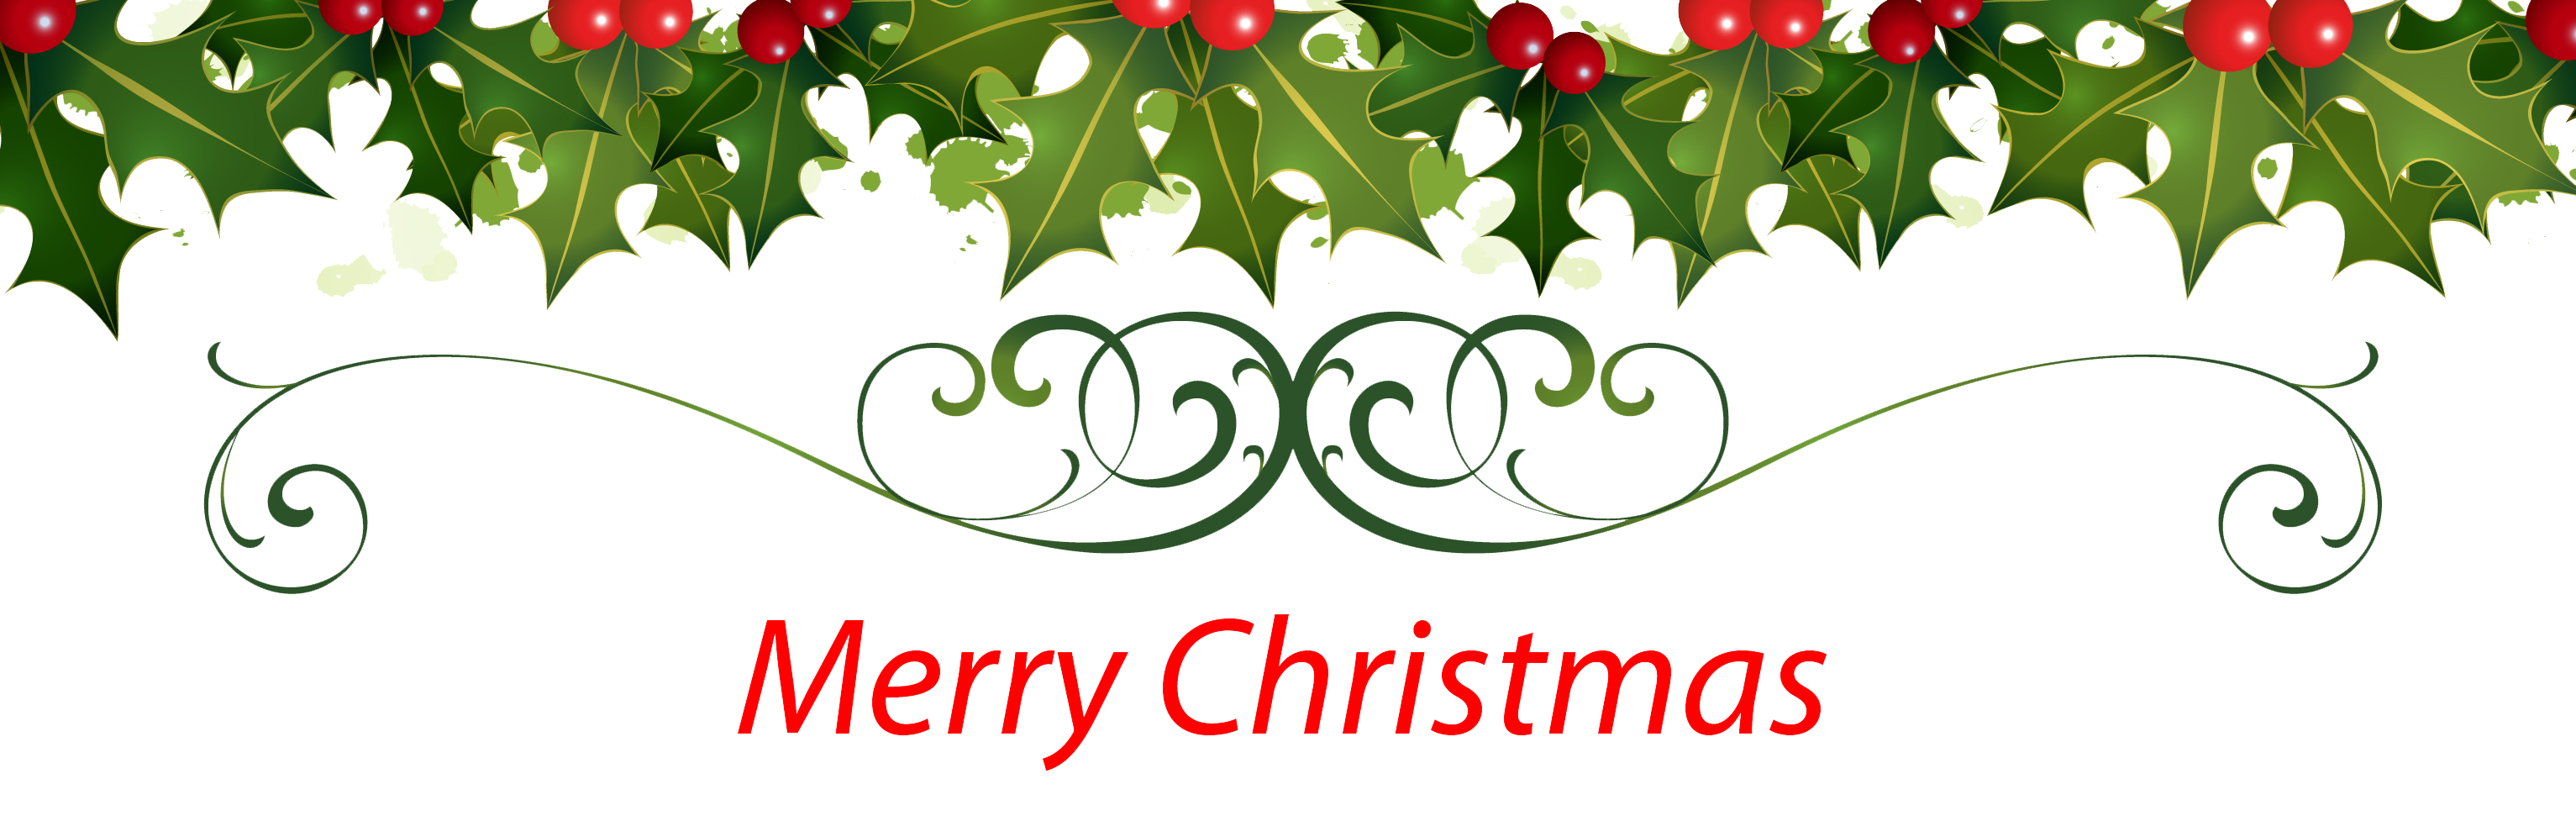 https://www.pngmart.com/files/11/Merry-Christmas-PNG-Clipart.png